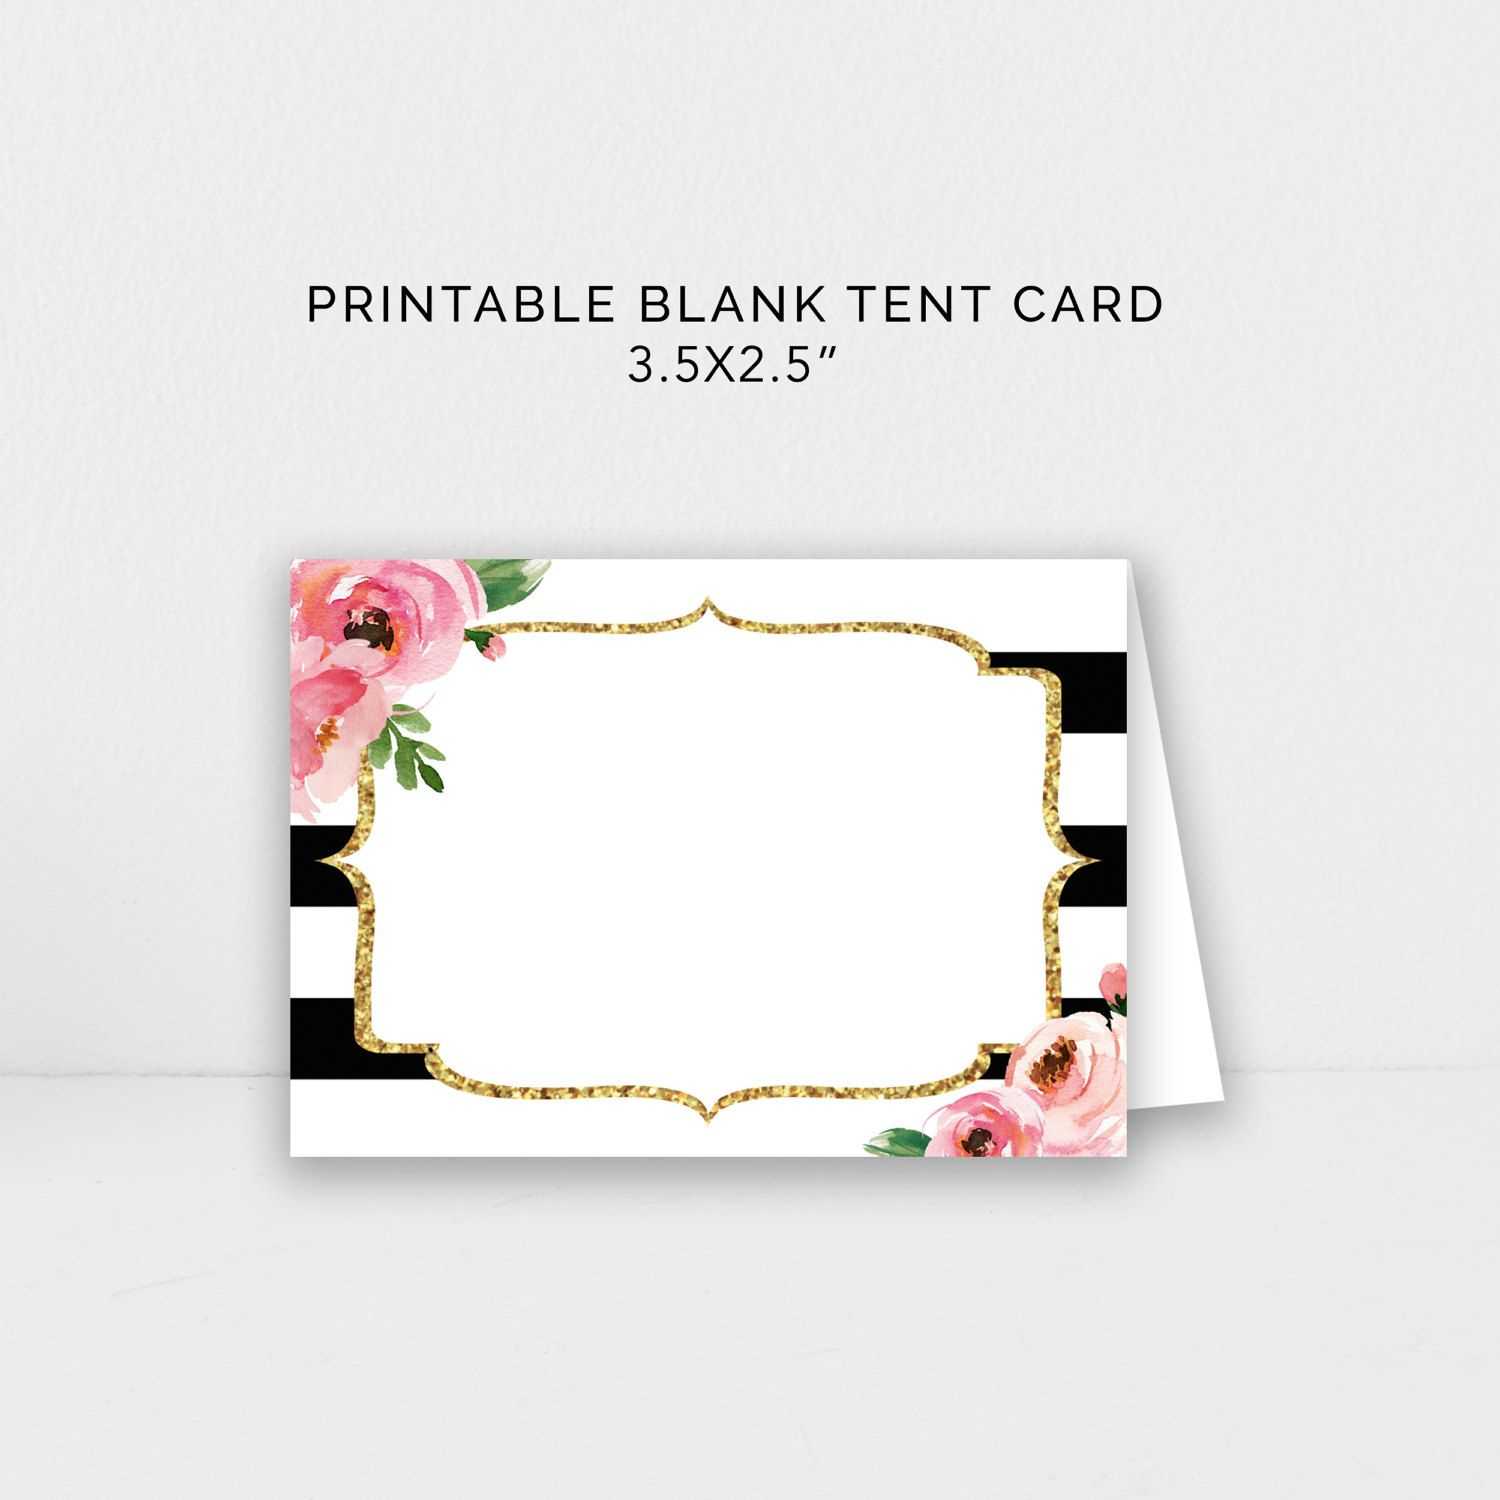 005 Template Ideas Blank Place Shocking Card Free Name Pertaining To Blank Tent Card Template